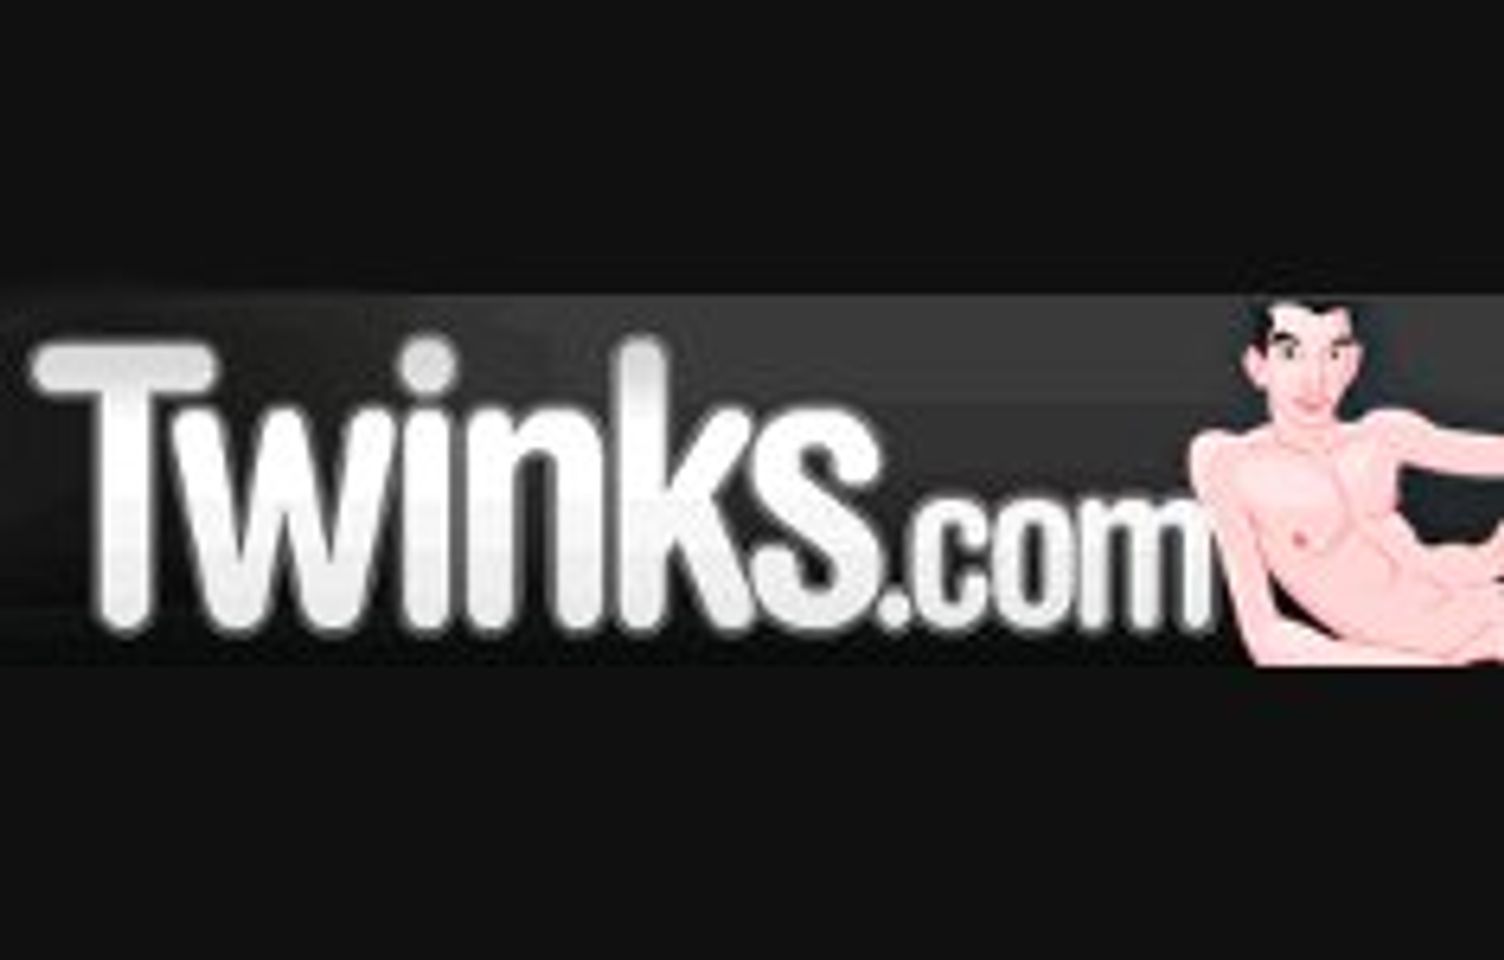 Twinks.com To Give Away MacBook Air in September